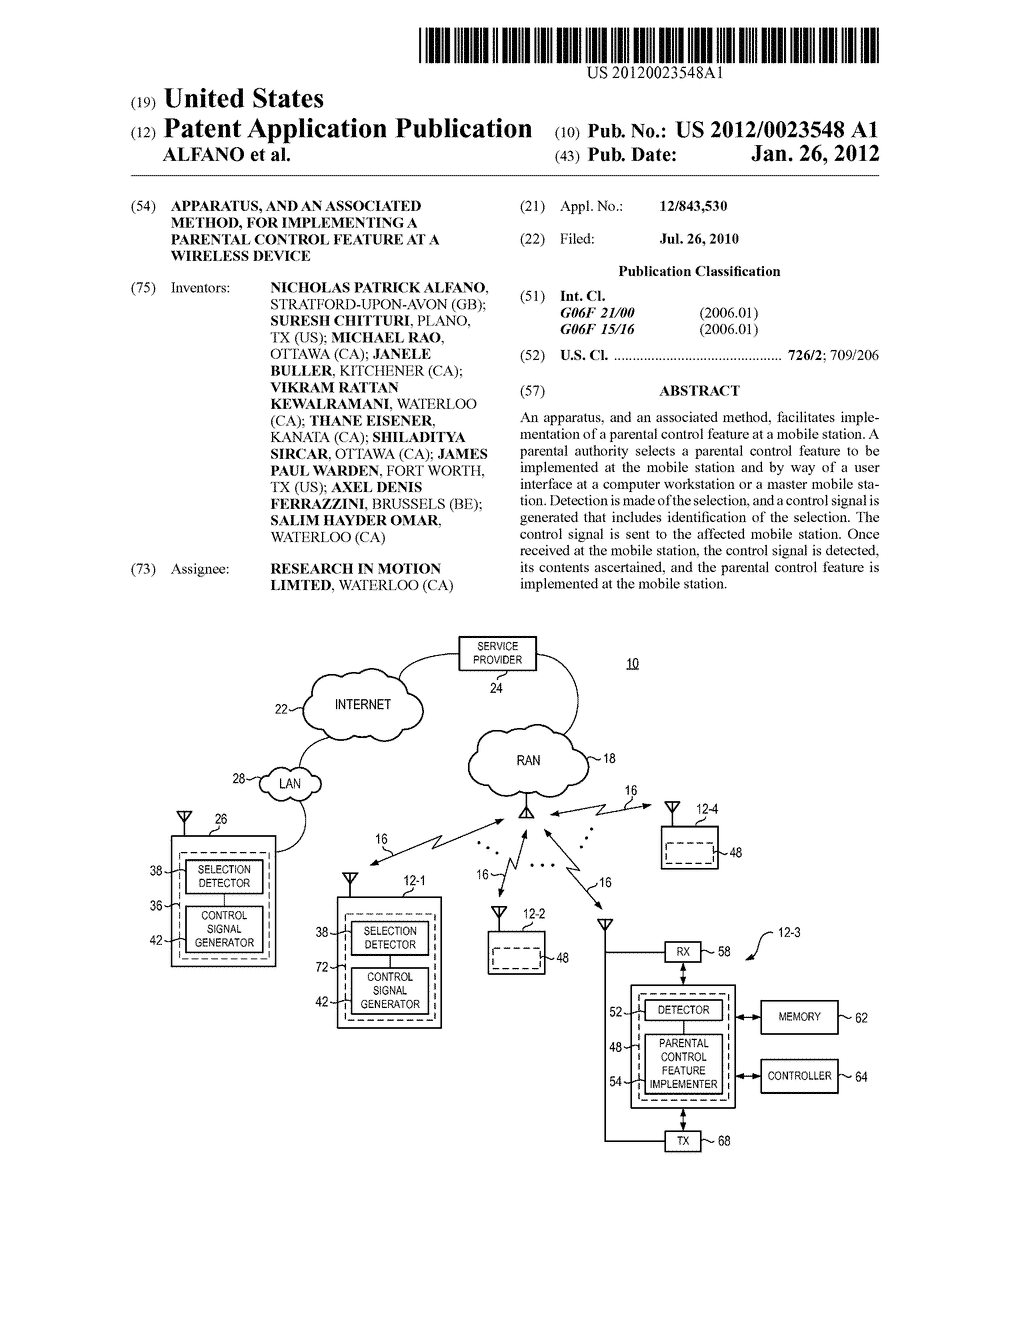 APPARATUS, AND AN ASSOCIATED METHOD, FOR IMPLEMENTING A PARENTAL CONTROL     FEATURE AT A WIRELESS DEVICE - diagram, schematic, and image 01